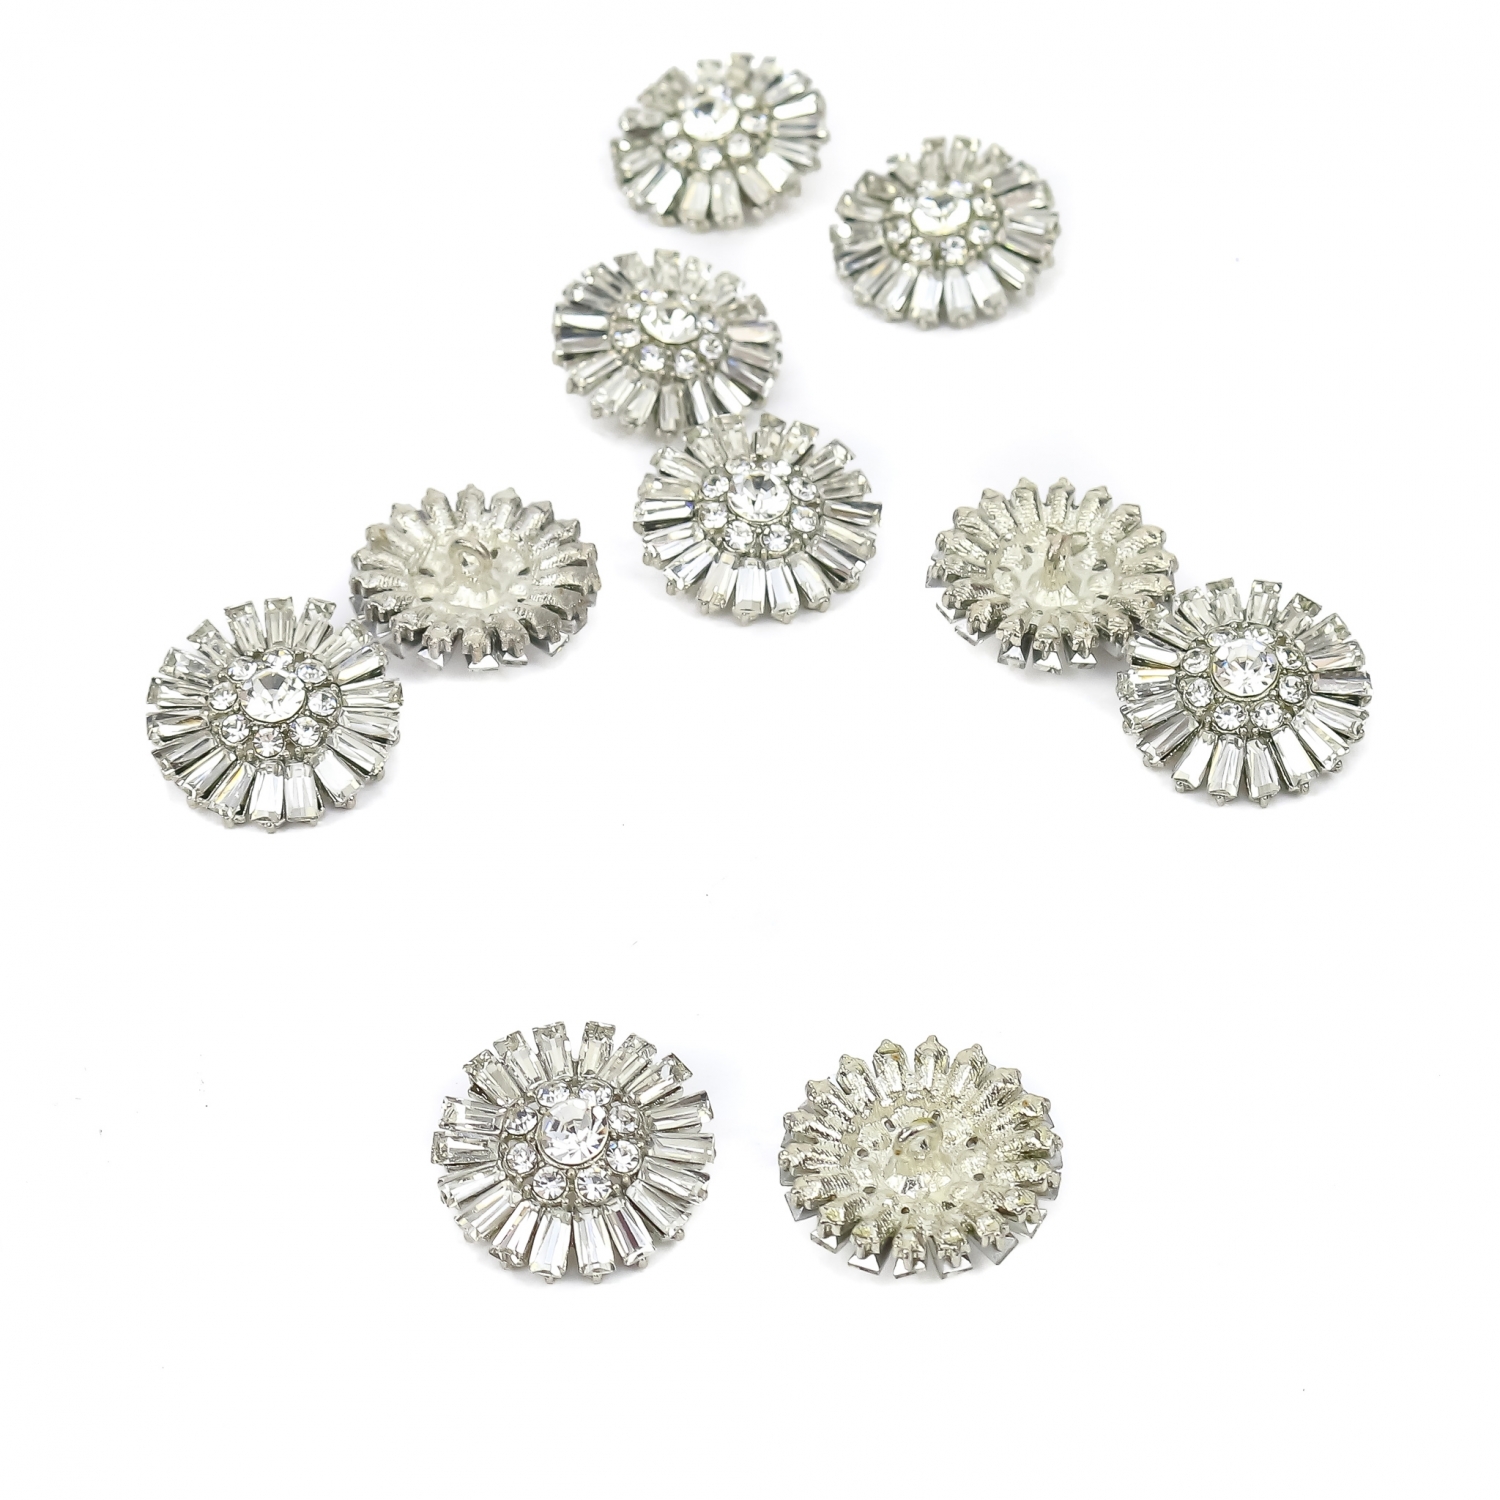 Shank Buttons with Rhinestones, Size 25 mm (10 pcs/pack) Code: BT1209